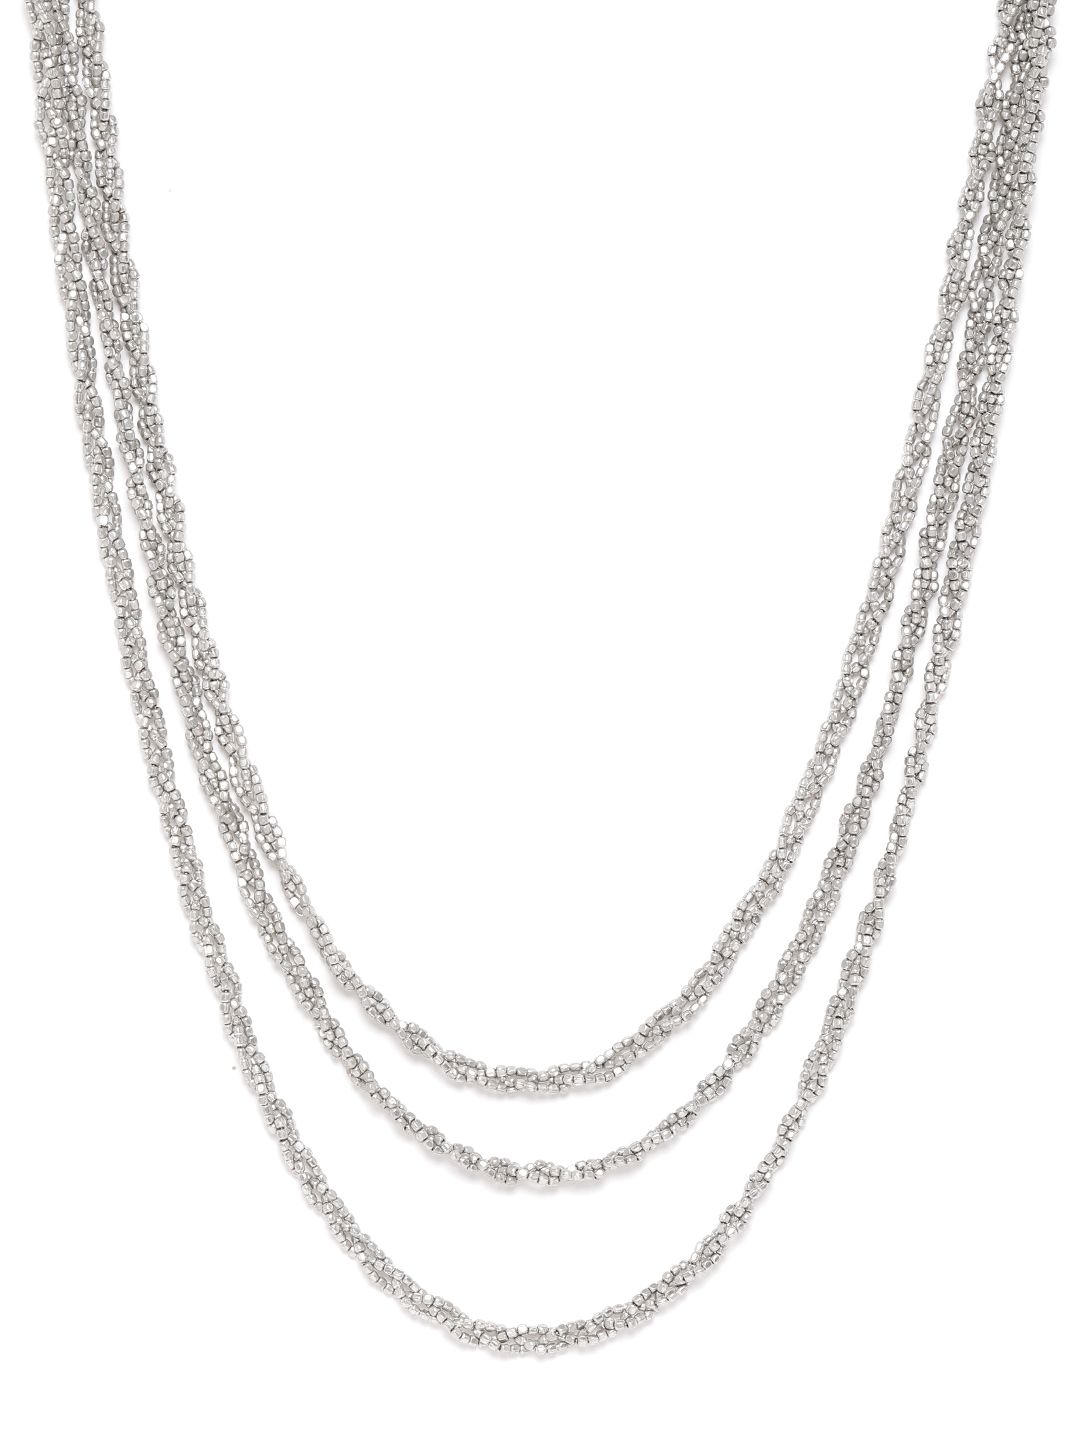 RICHEERA Women Silver-Plated Beaded Layered Necklace Price in India